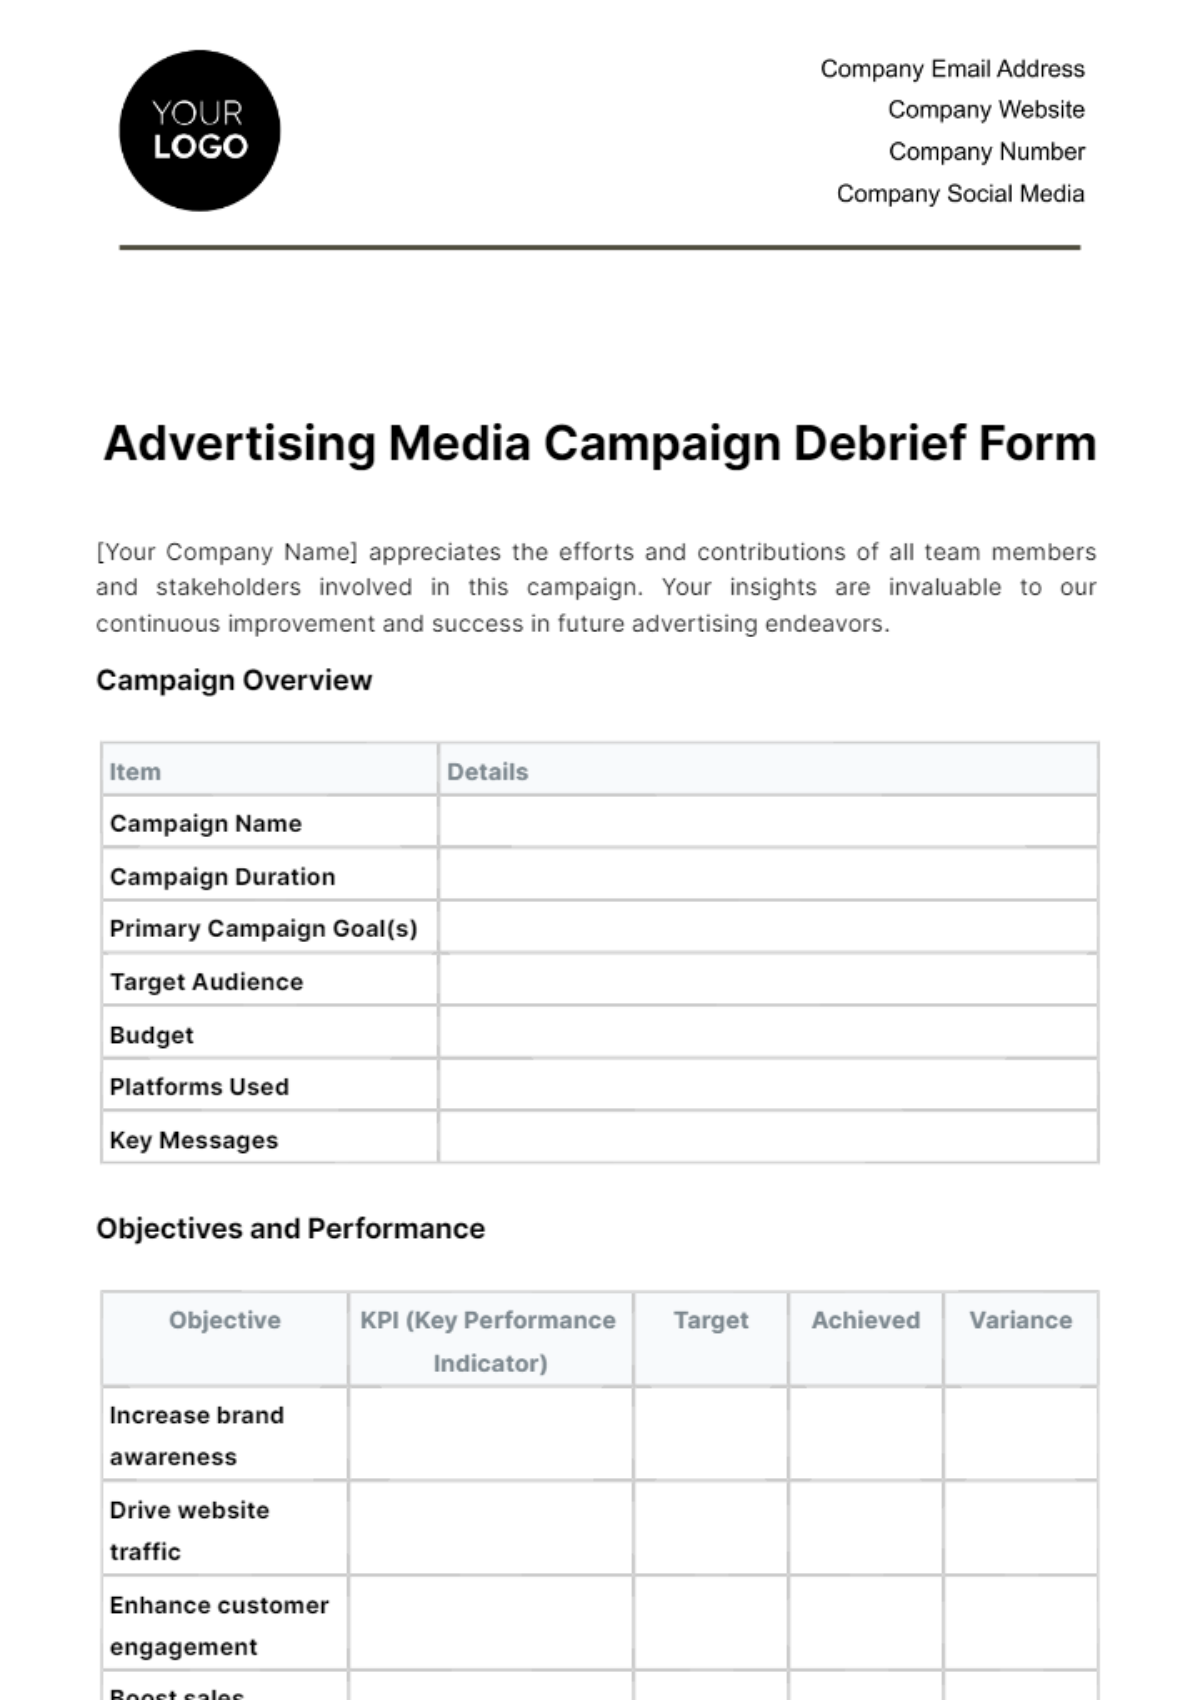 Free Advertising Media Campaign Debrief Form Template